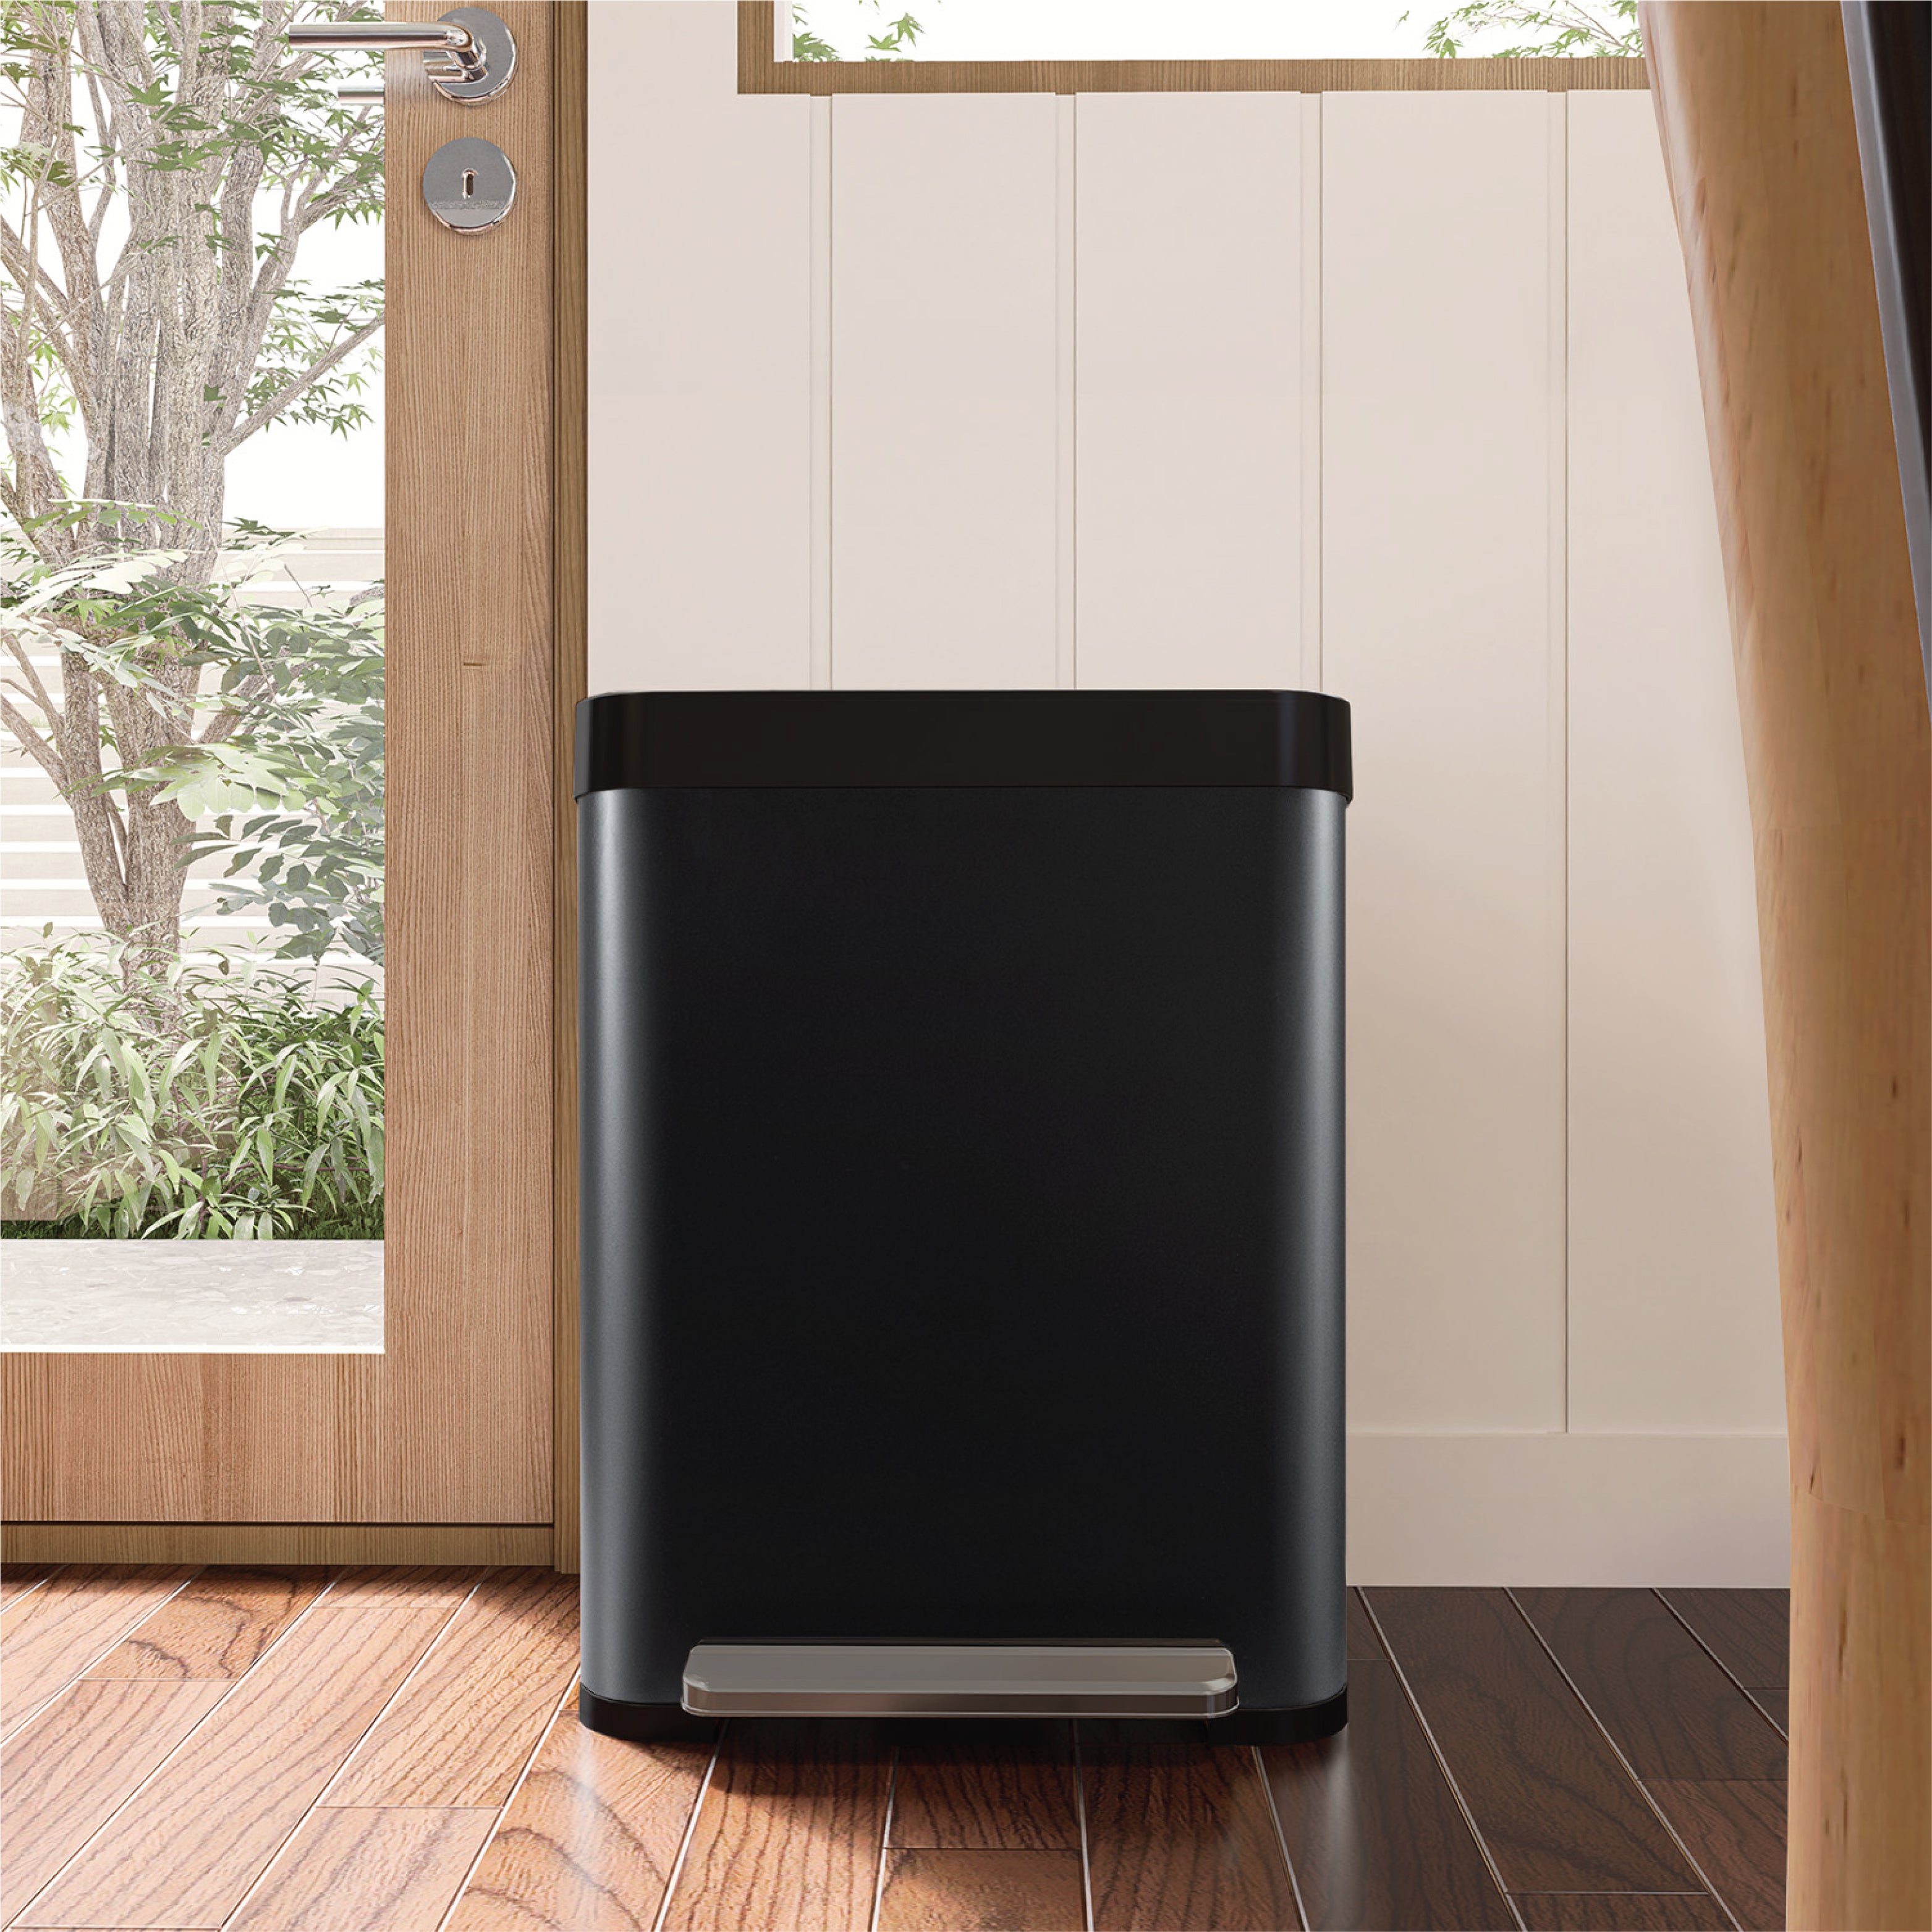 Virtuoso Collection - 13 Gallon Liner-Free Step Pedal Kitchen Trash Can - Home Zone Living